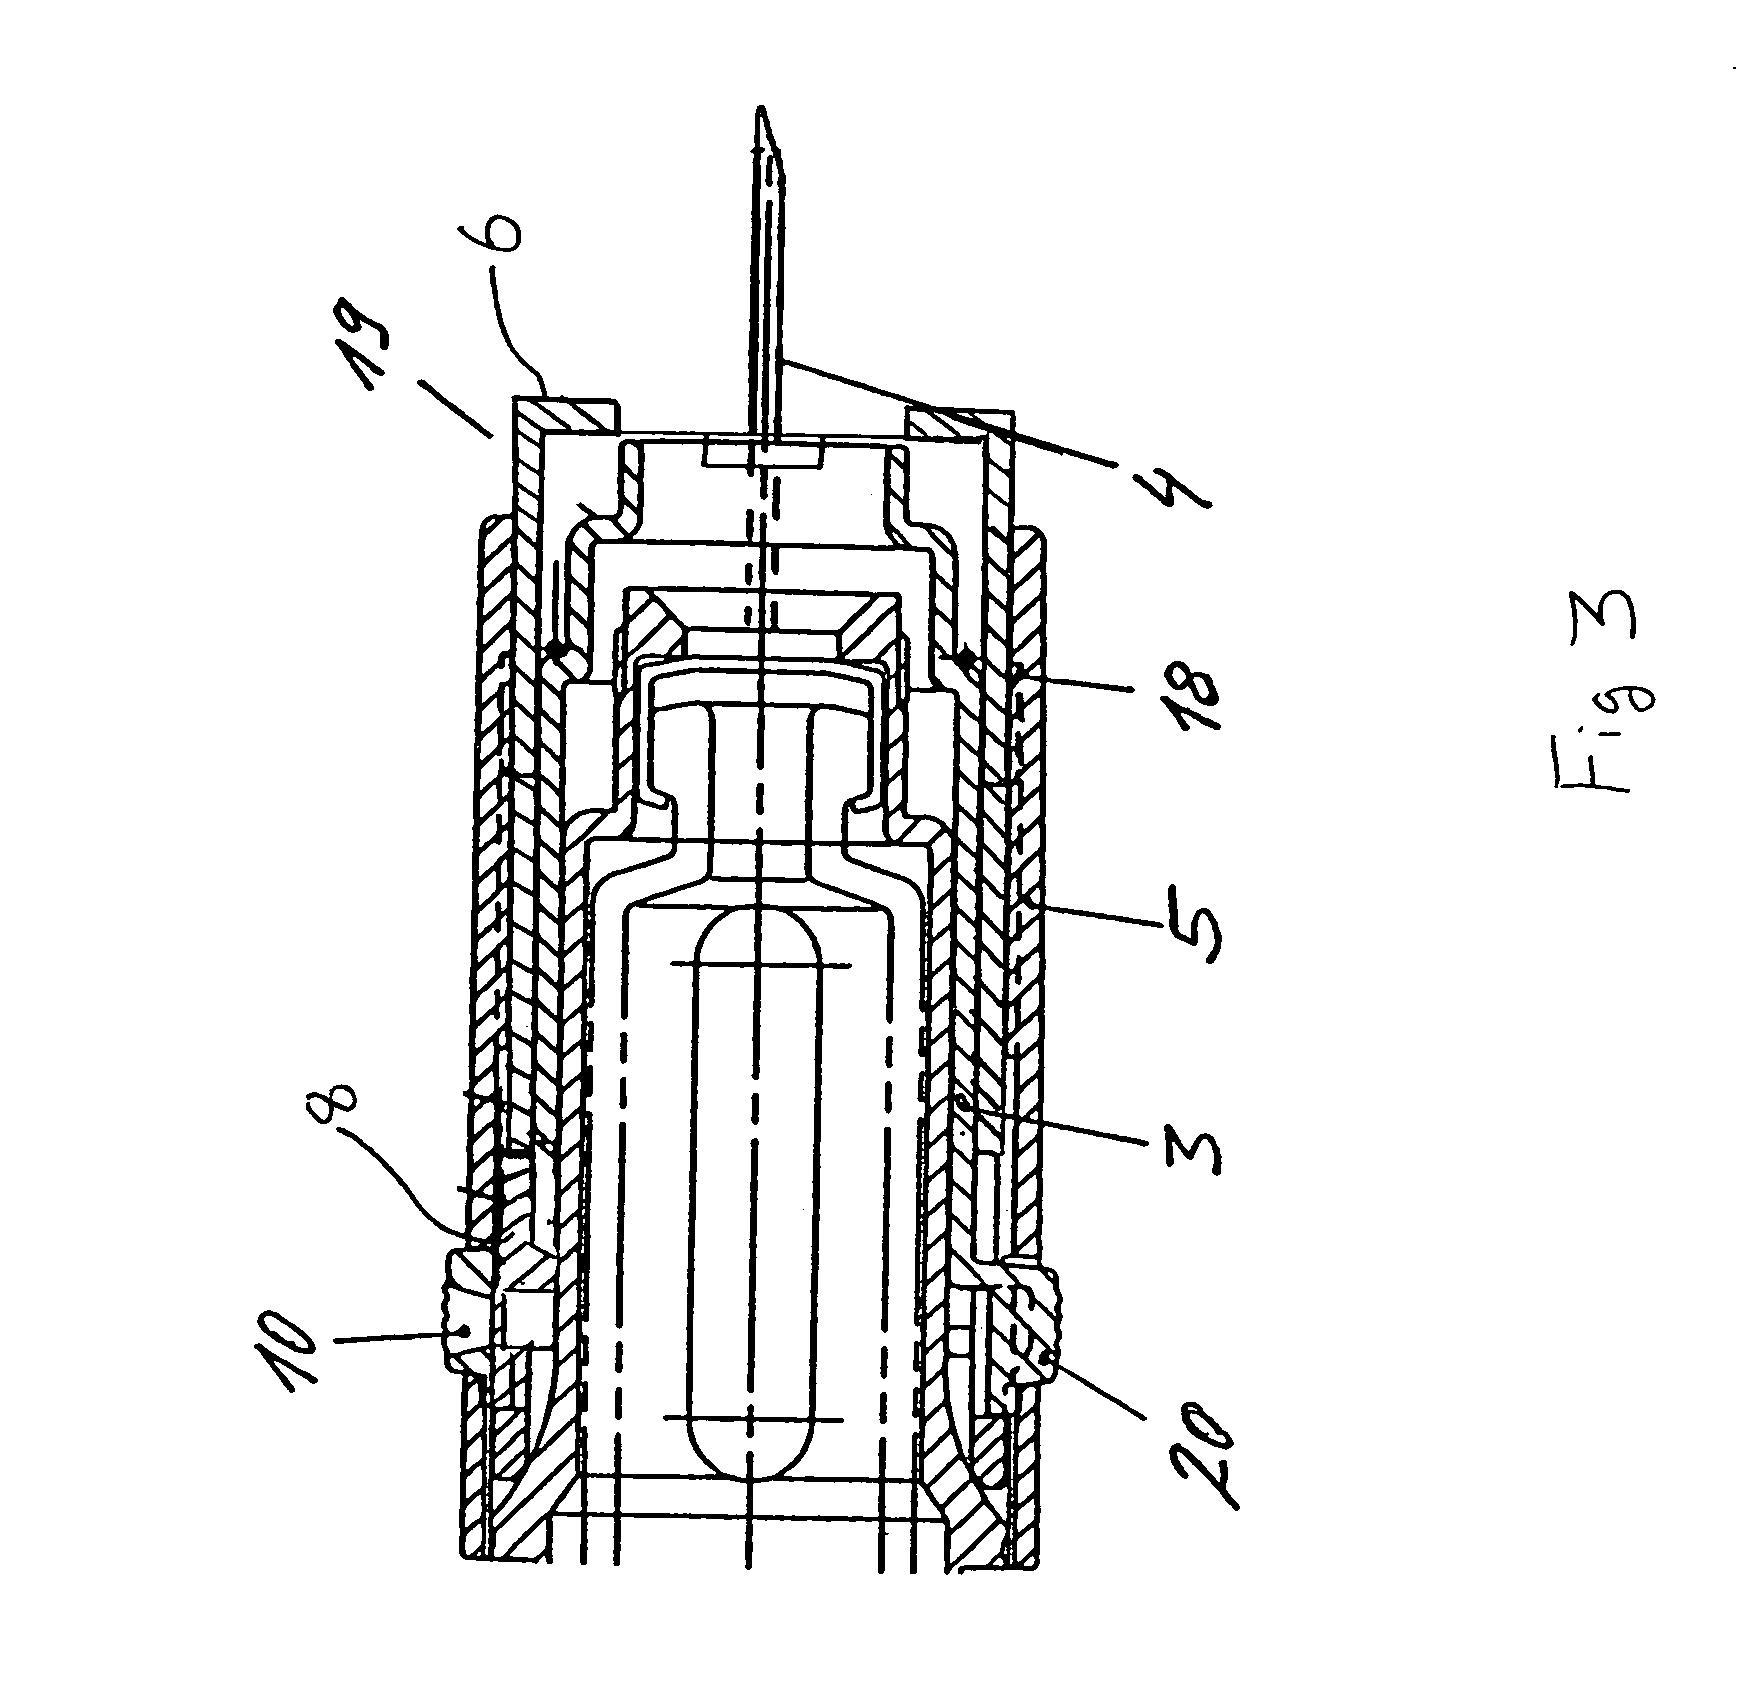 Apparatus for subcutaneous administration of an injectable product